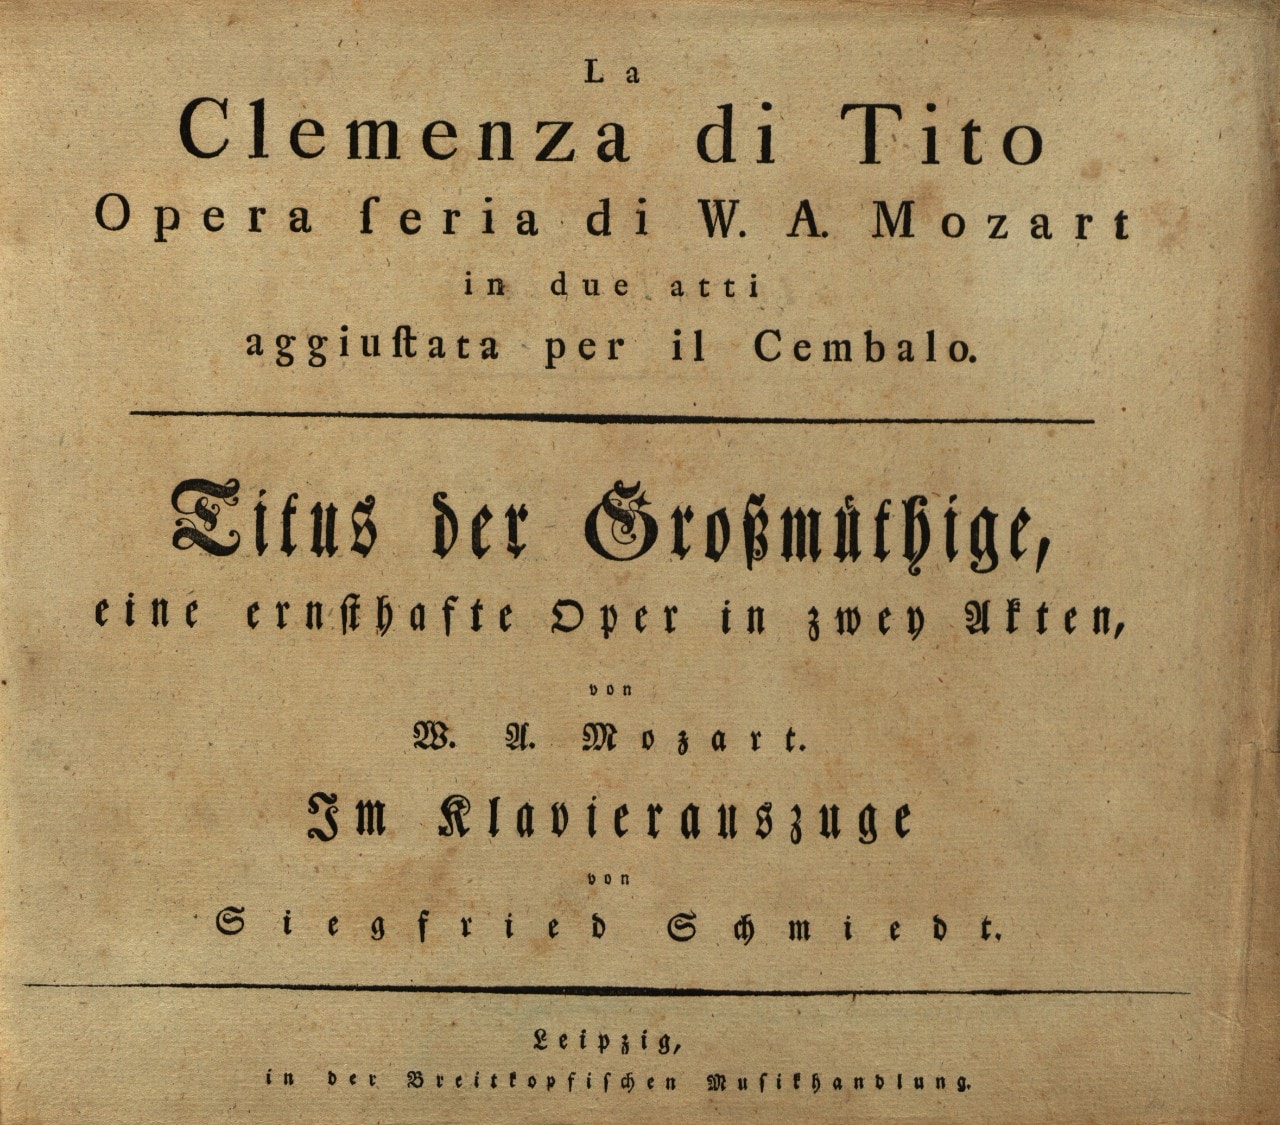 Image of Wolfgang Amadeus Mozart's vocal score of Clemenza di Tito. 1795